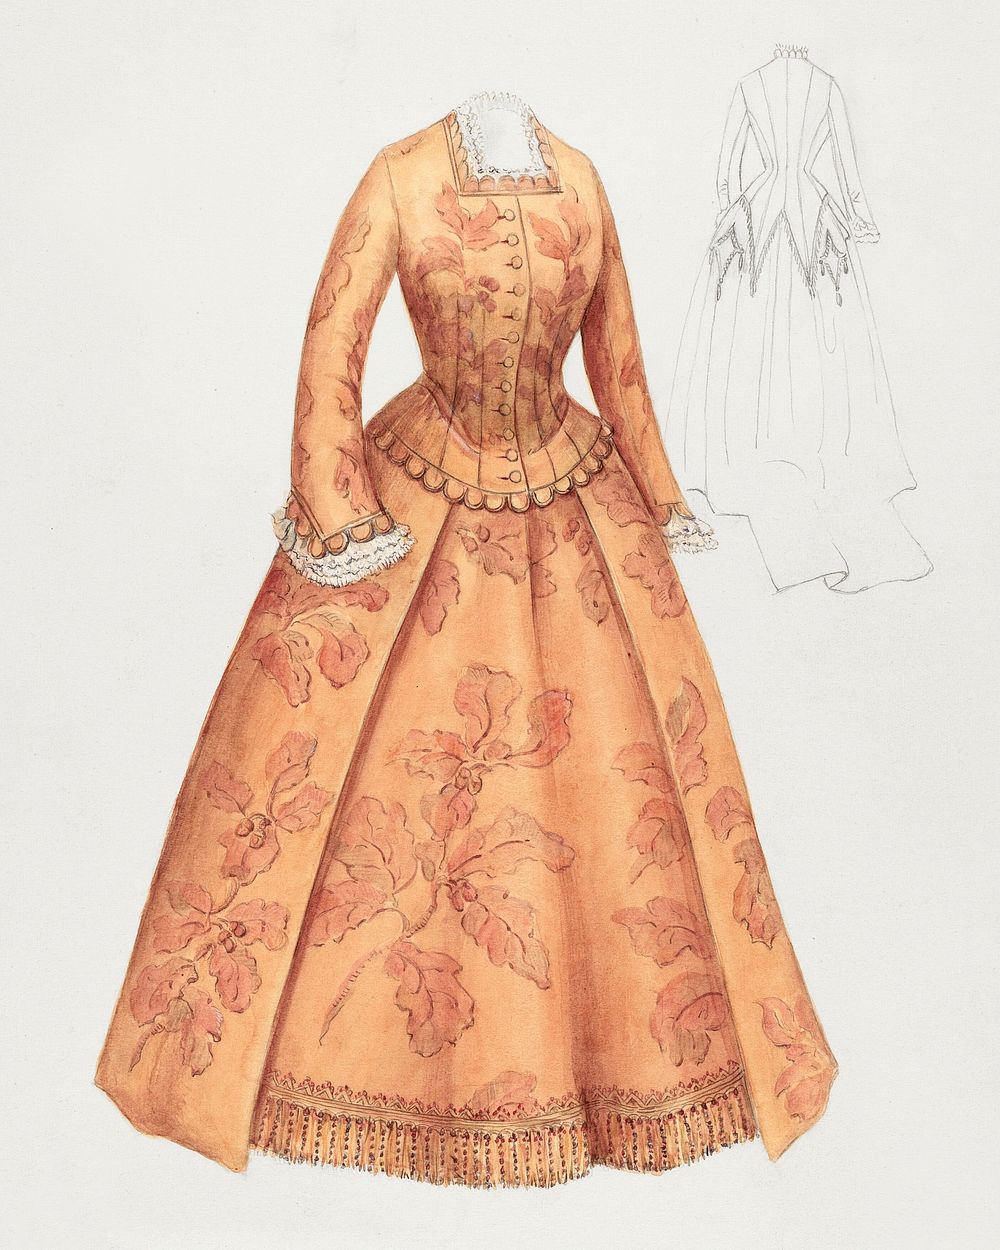 Dinner Dress (1935&ndash;1942) by Hedwig Emanuel. Original from The National Gallery of Art. Digitally enhanced by rawpixel.